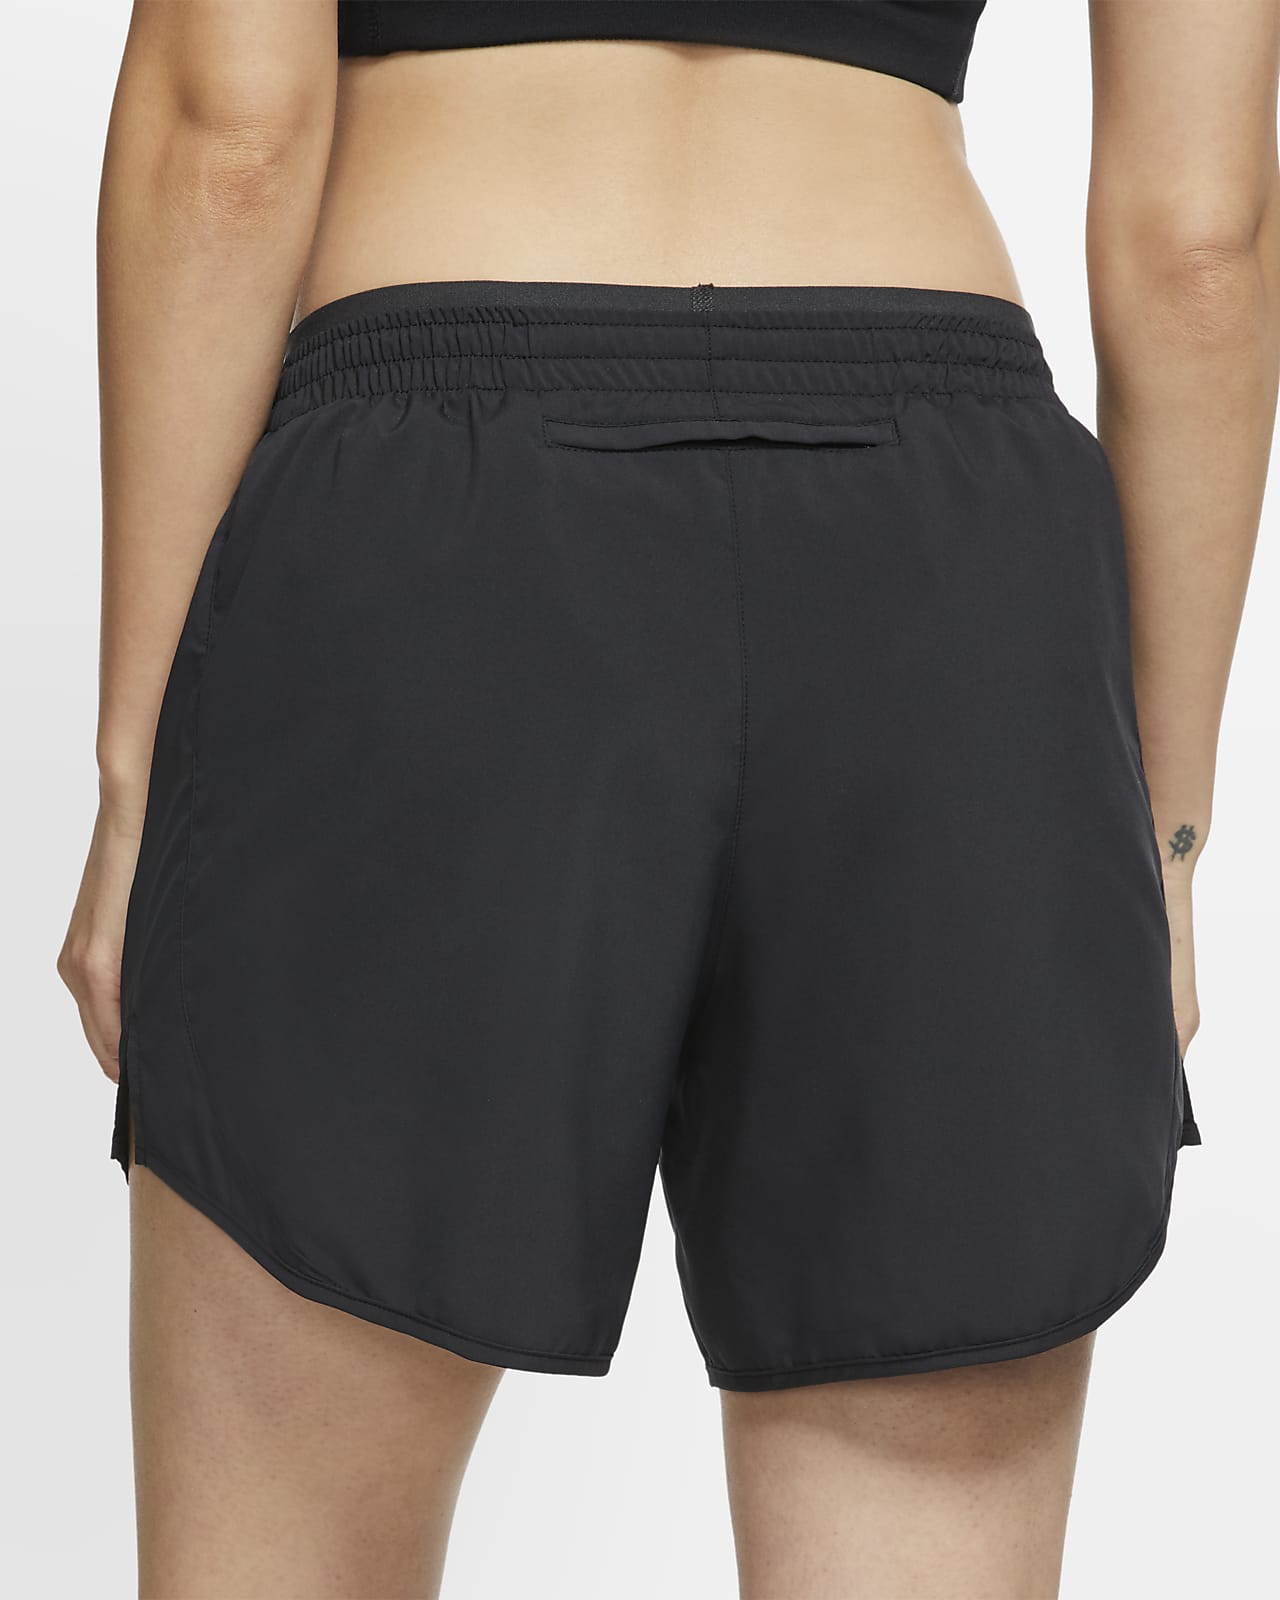 nike womens tempo luxe 3in running shorts